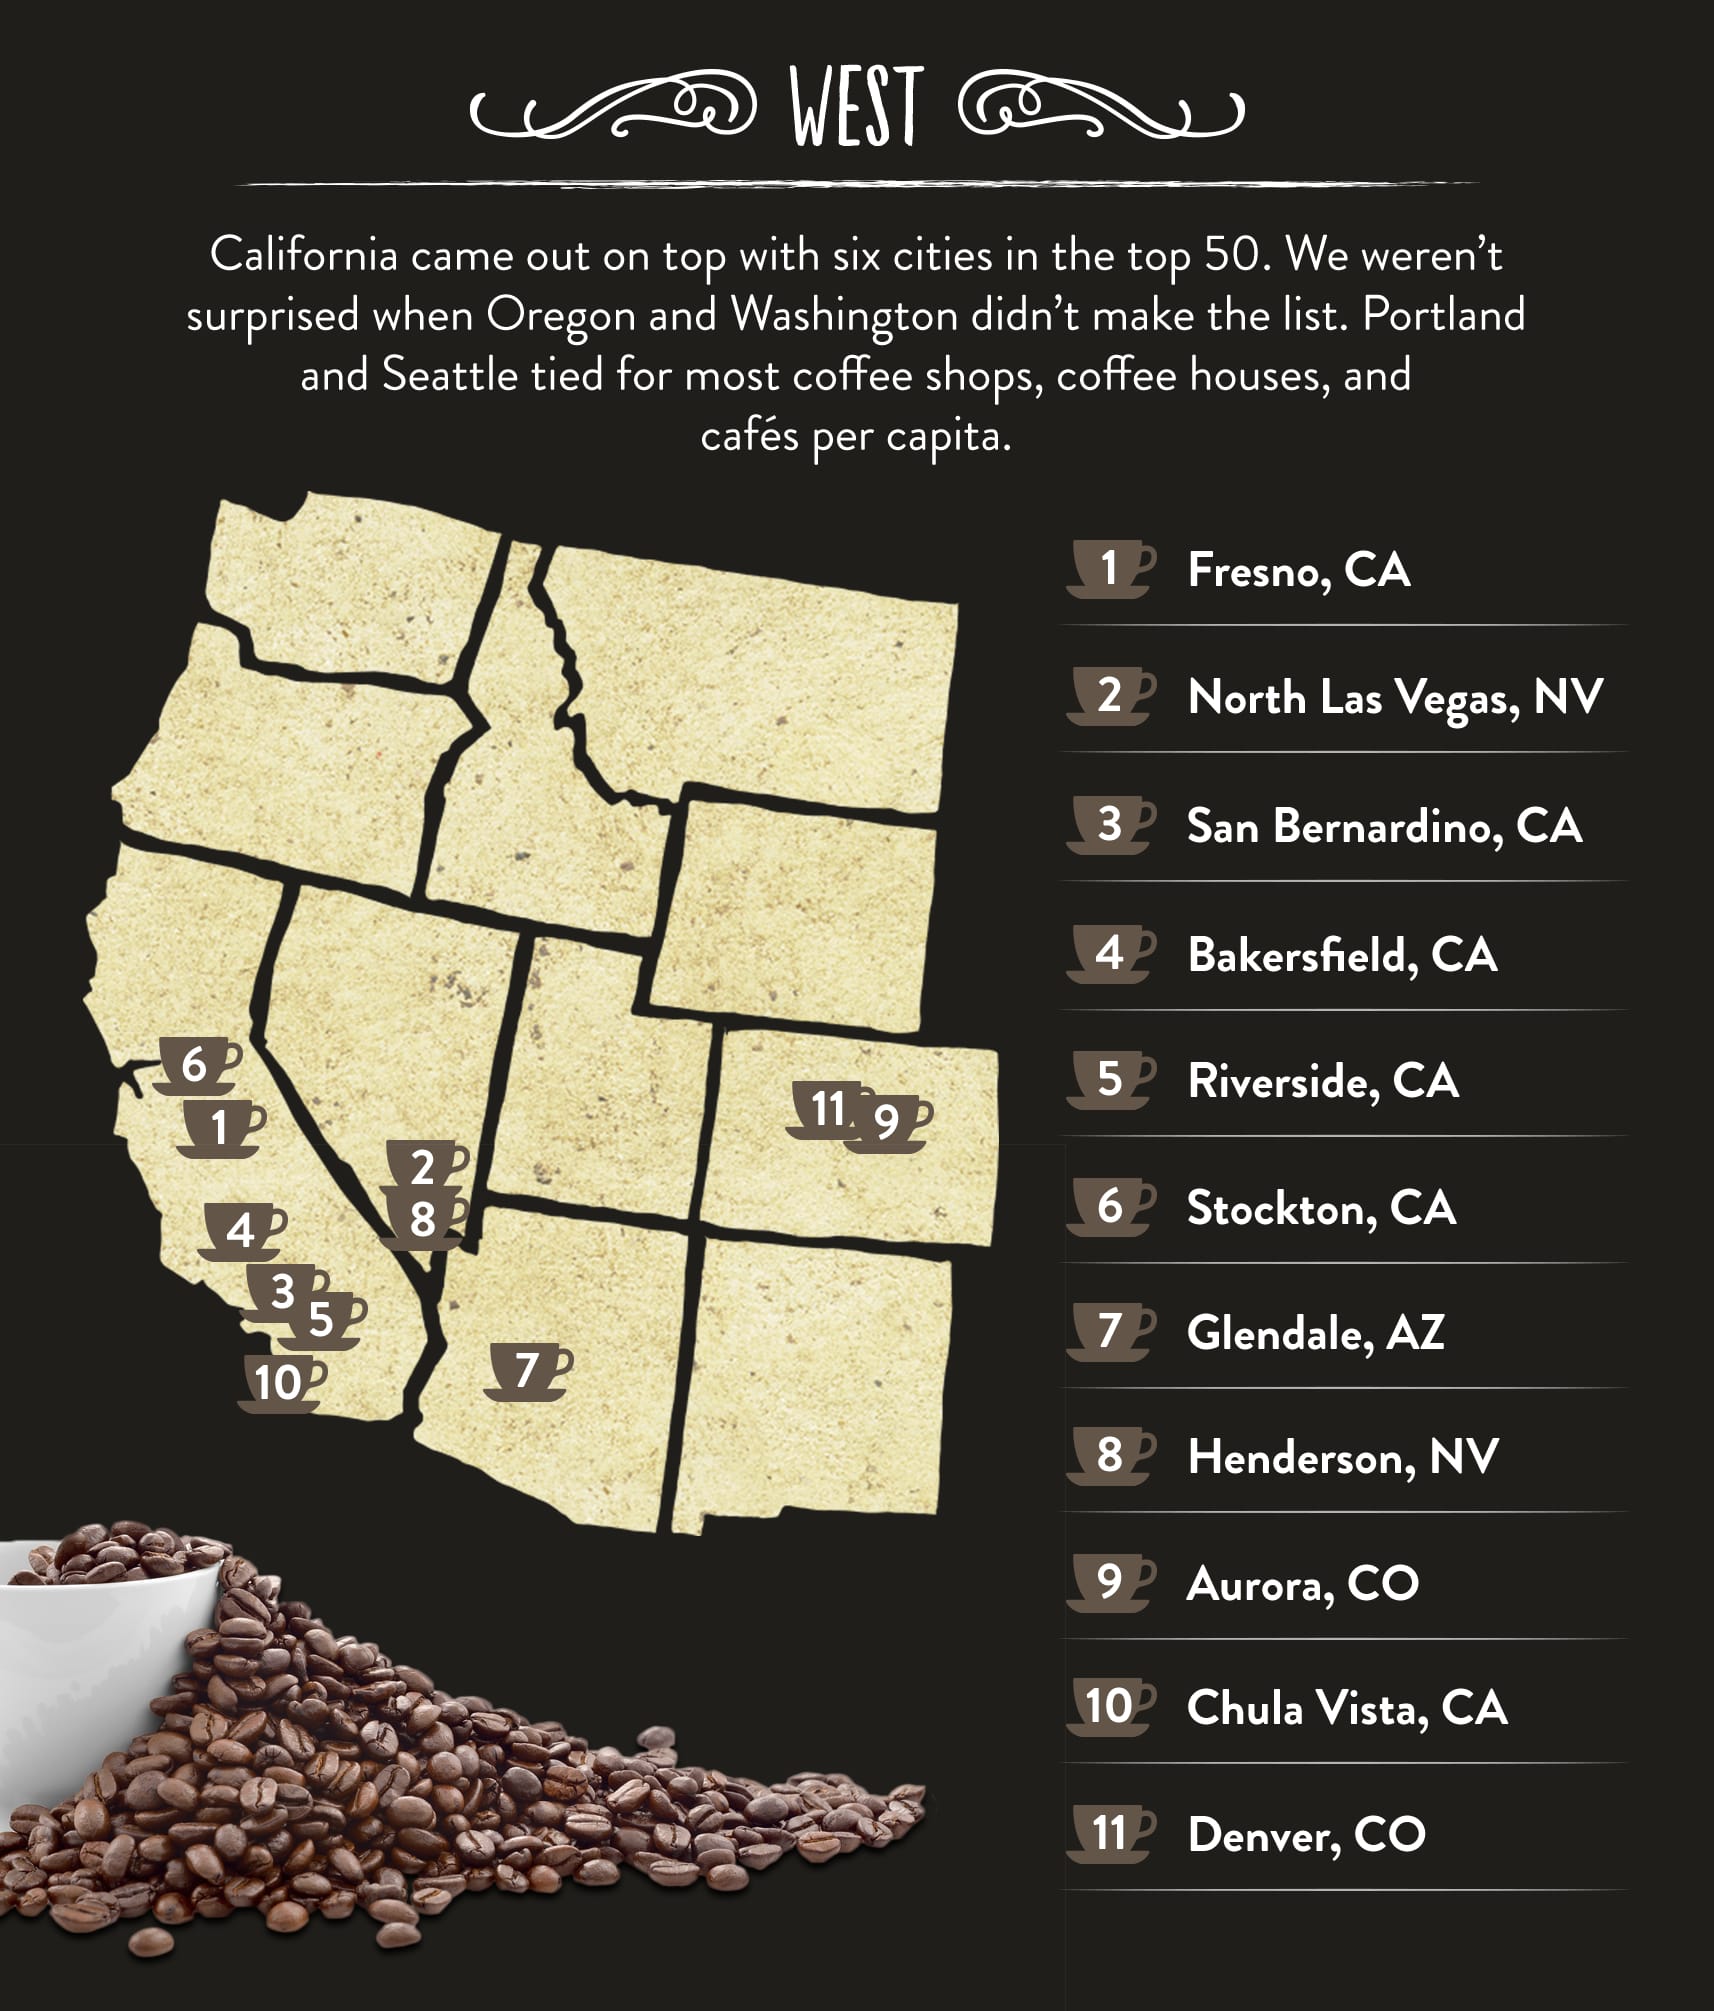 Best Coffee Cities in the West